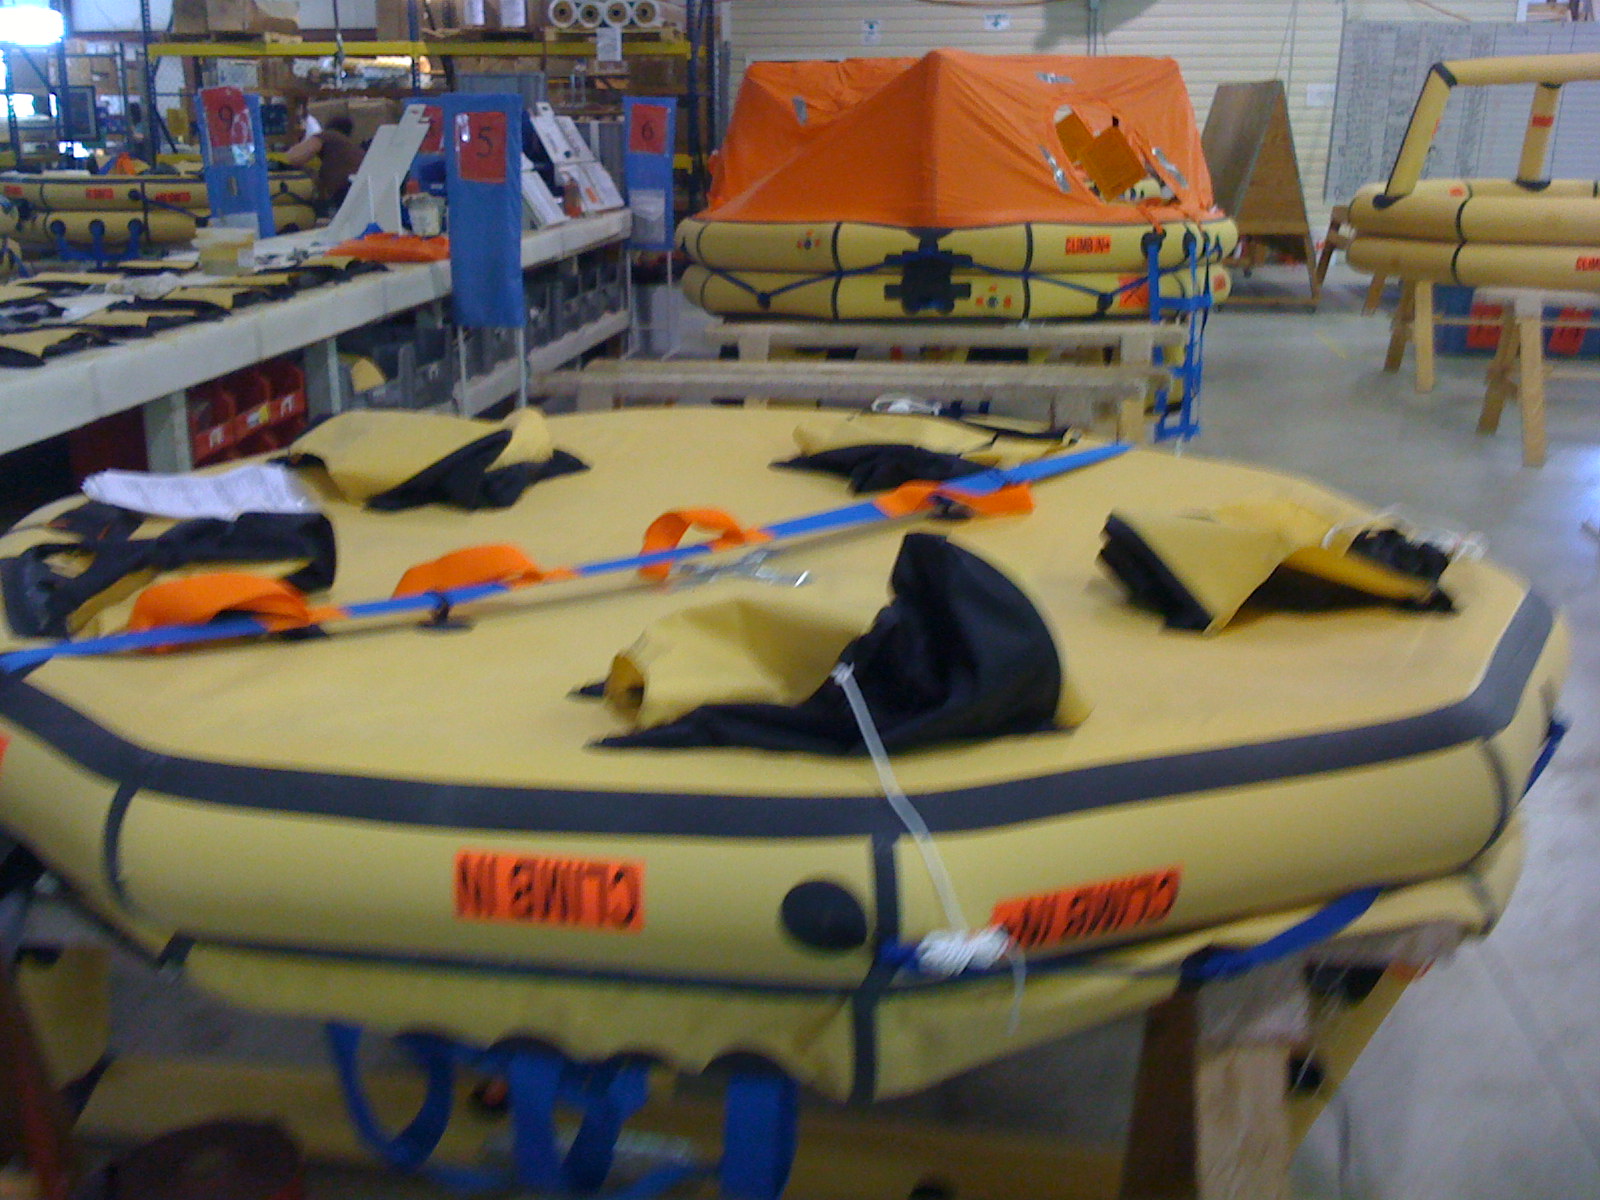 Winslow life raft under construction the bottom is facing up.